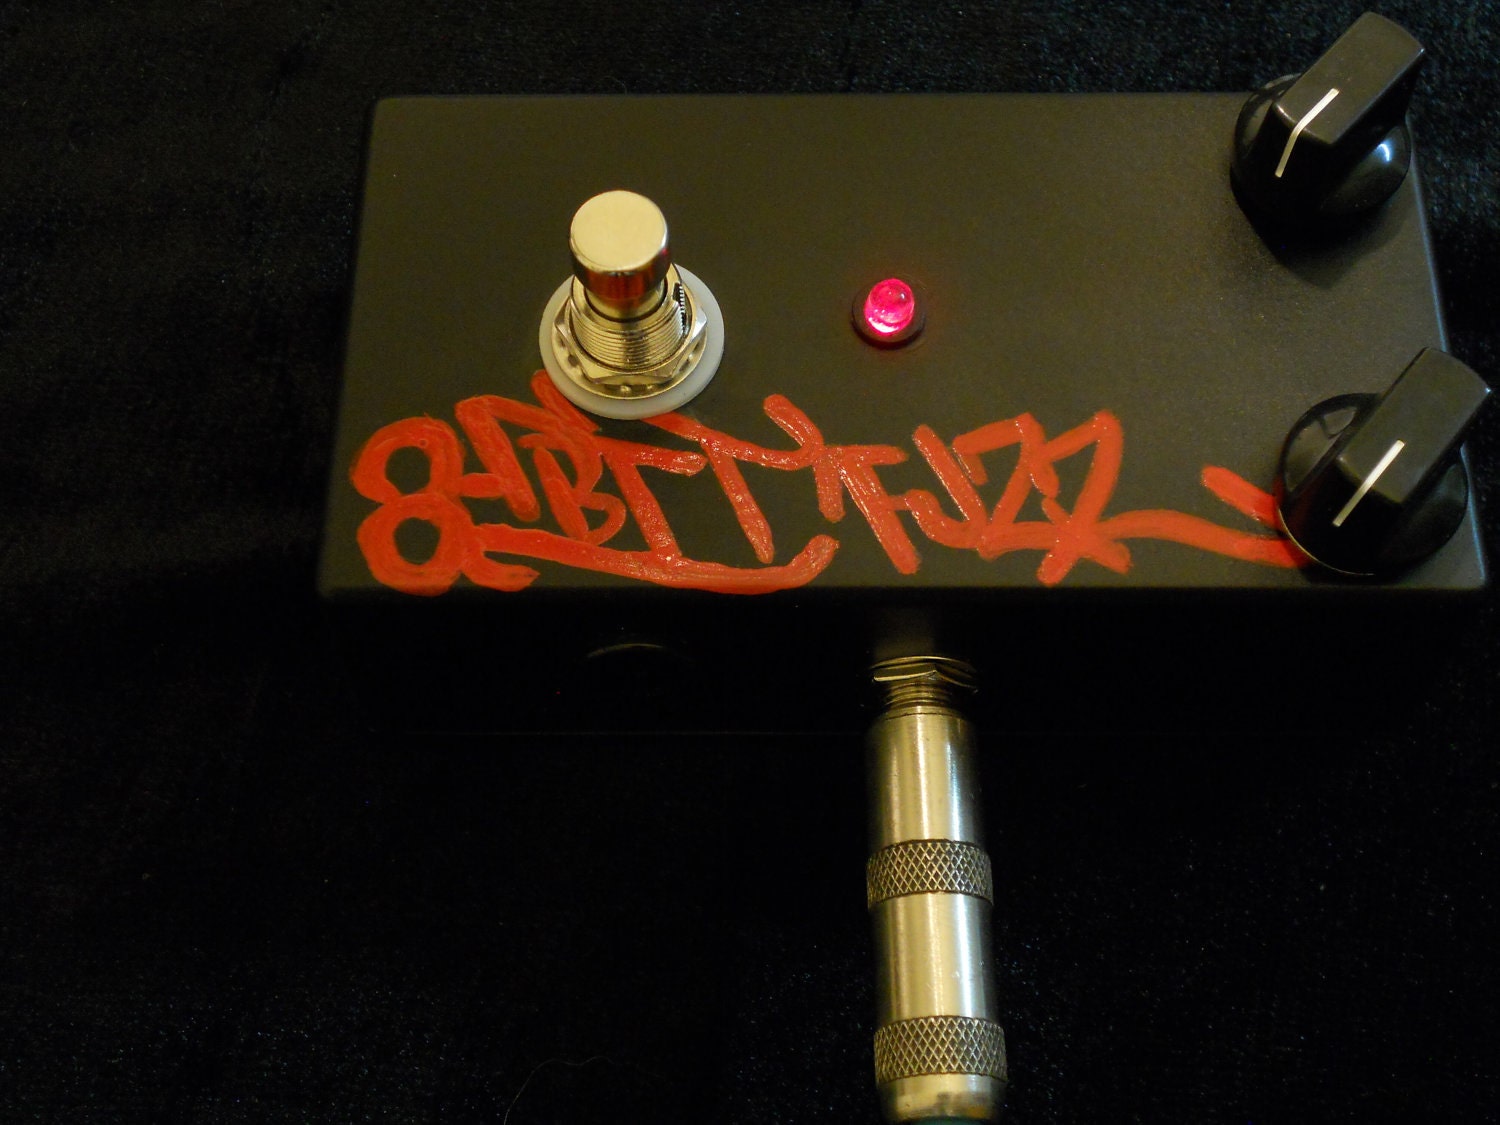 8-BIT FUZZ SYNTH octave synth distortion pedal